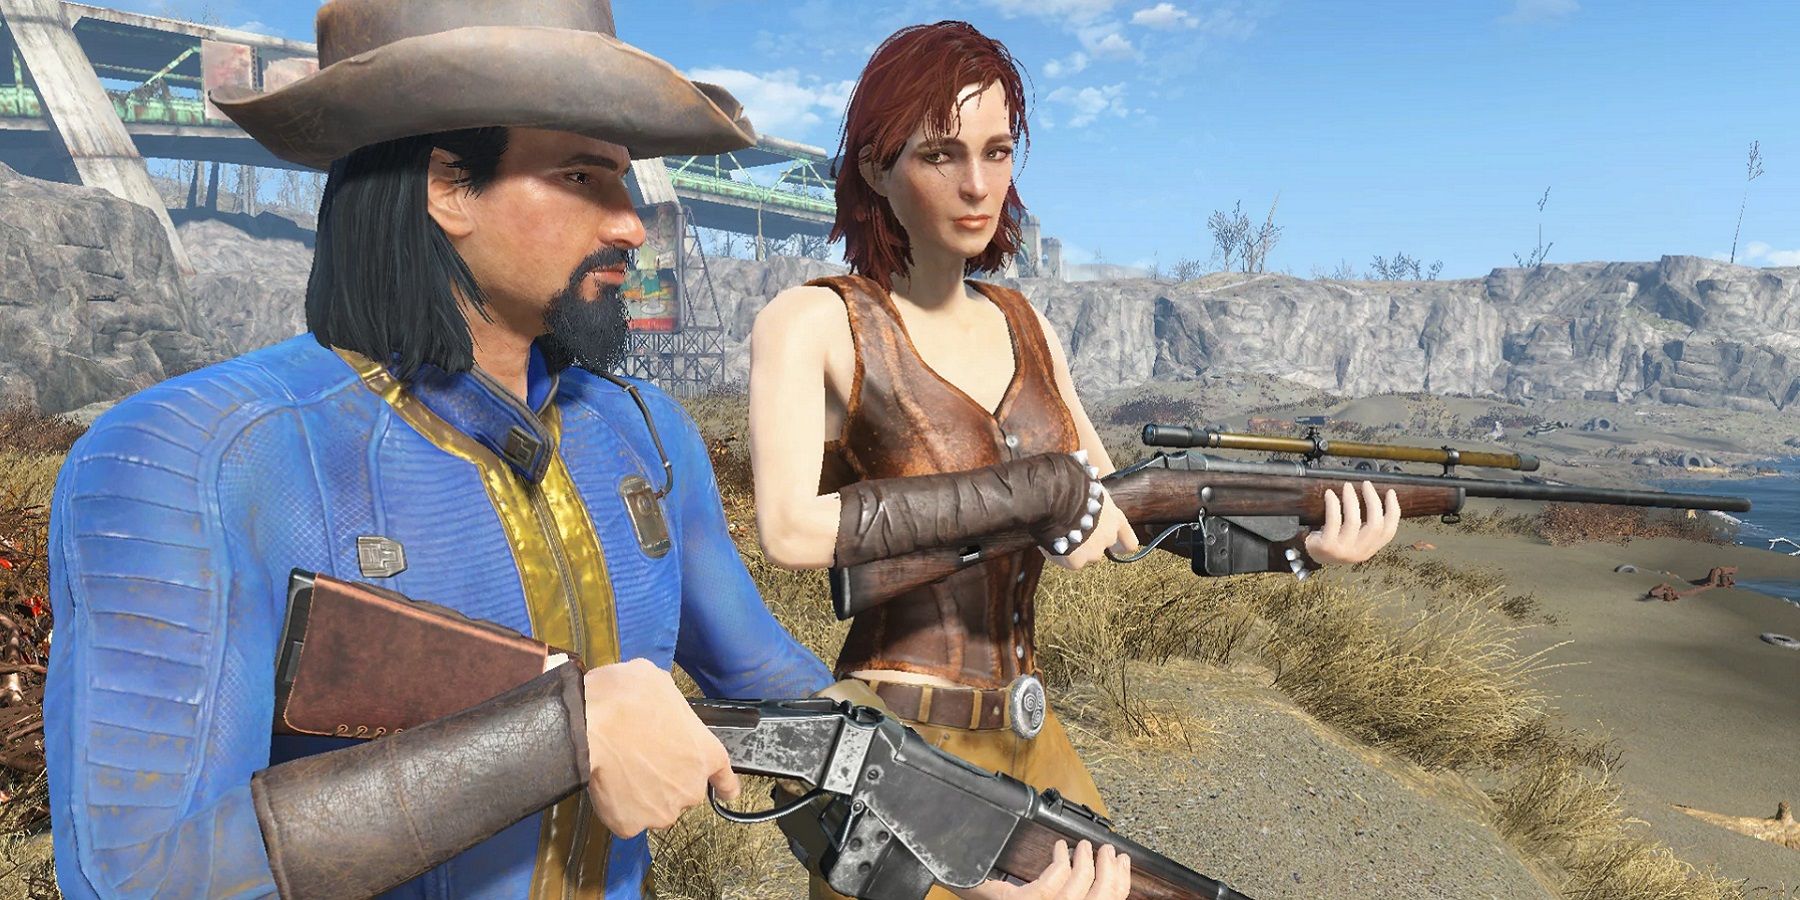 Fallout 4 Mod Changes Gendered Pronouns to Non-Binary